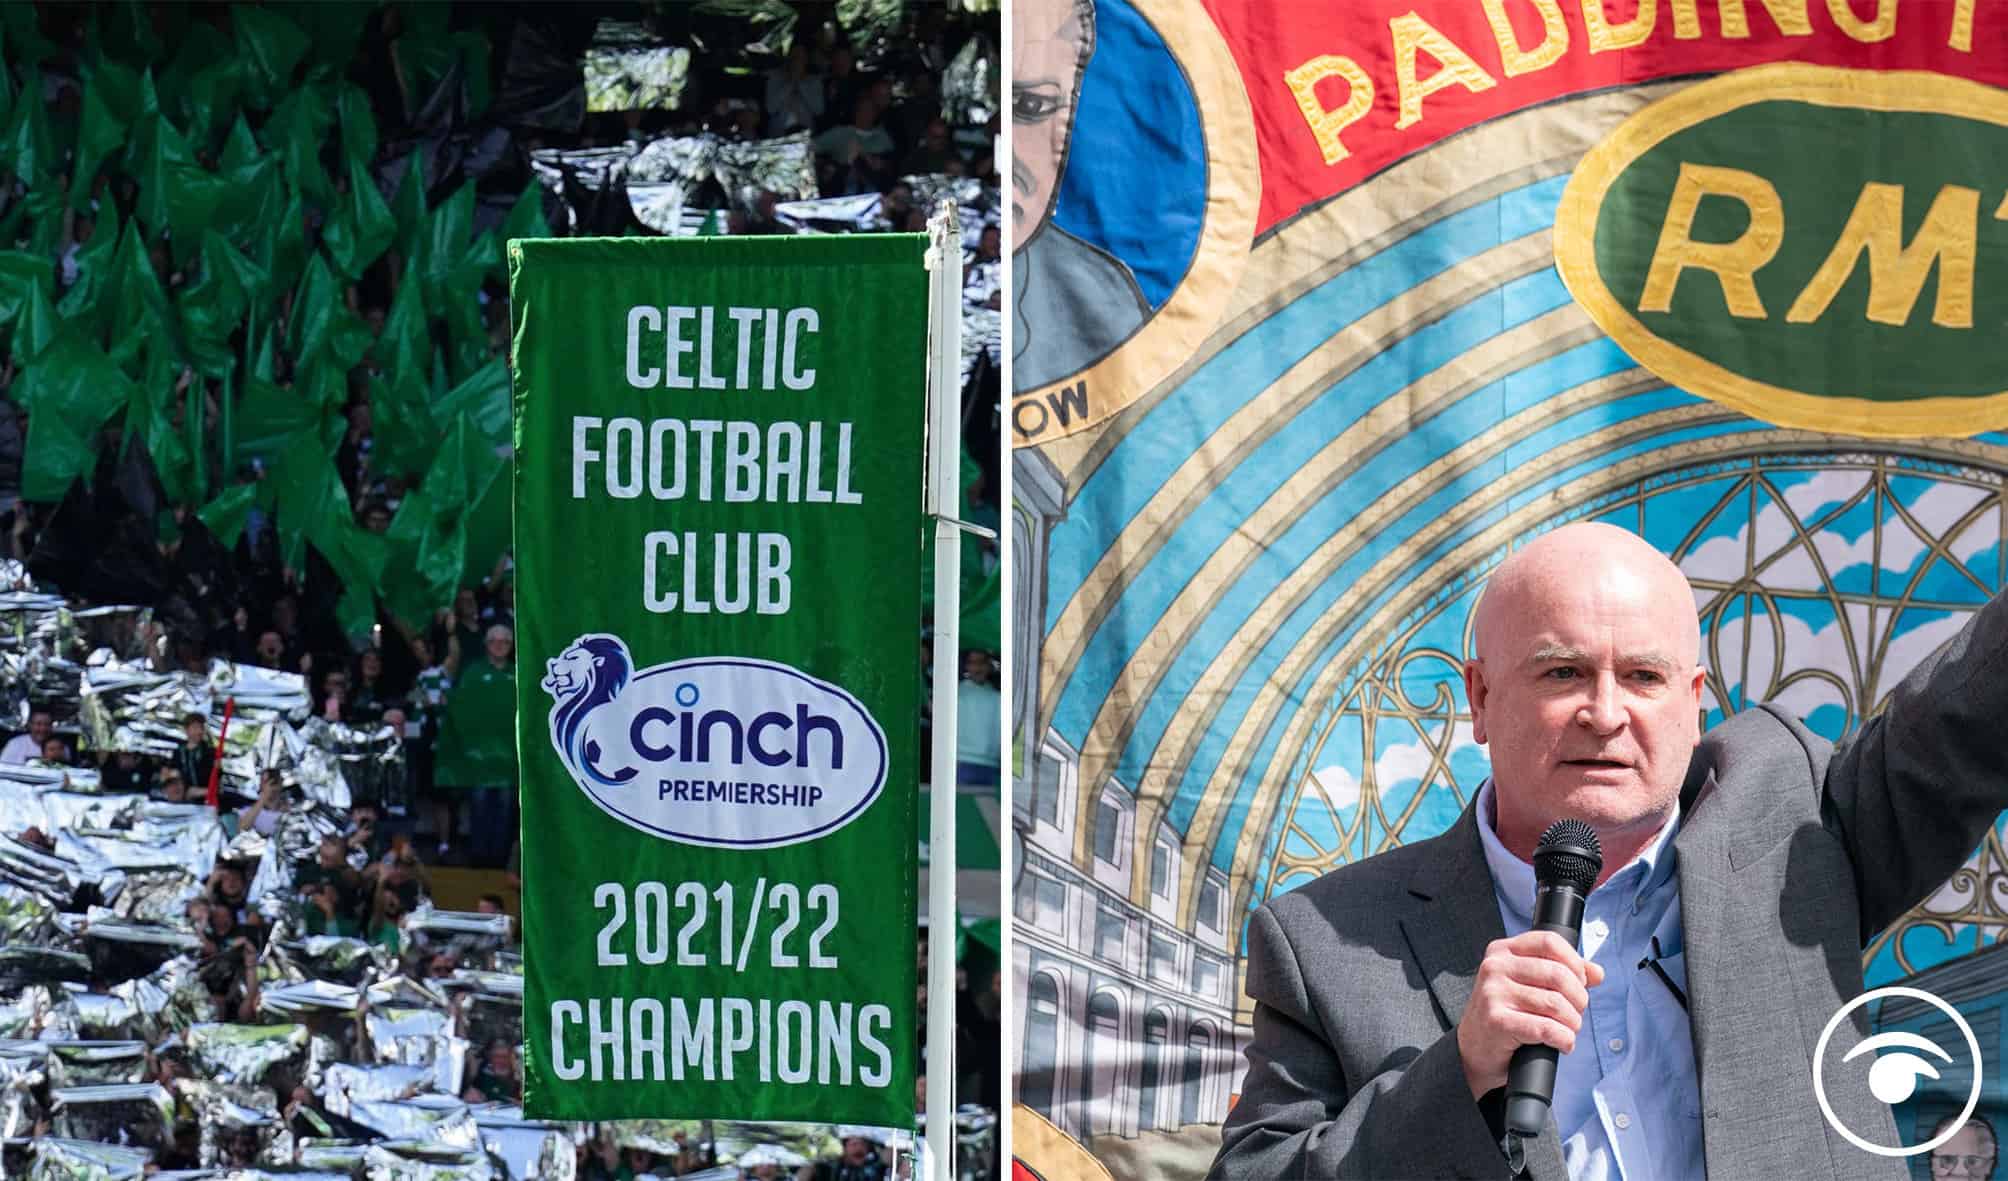 Watch: Celtic fans NSFW chant about Tories and show support for RMT